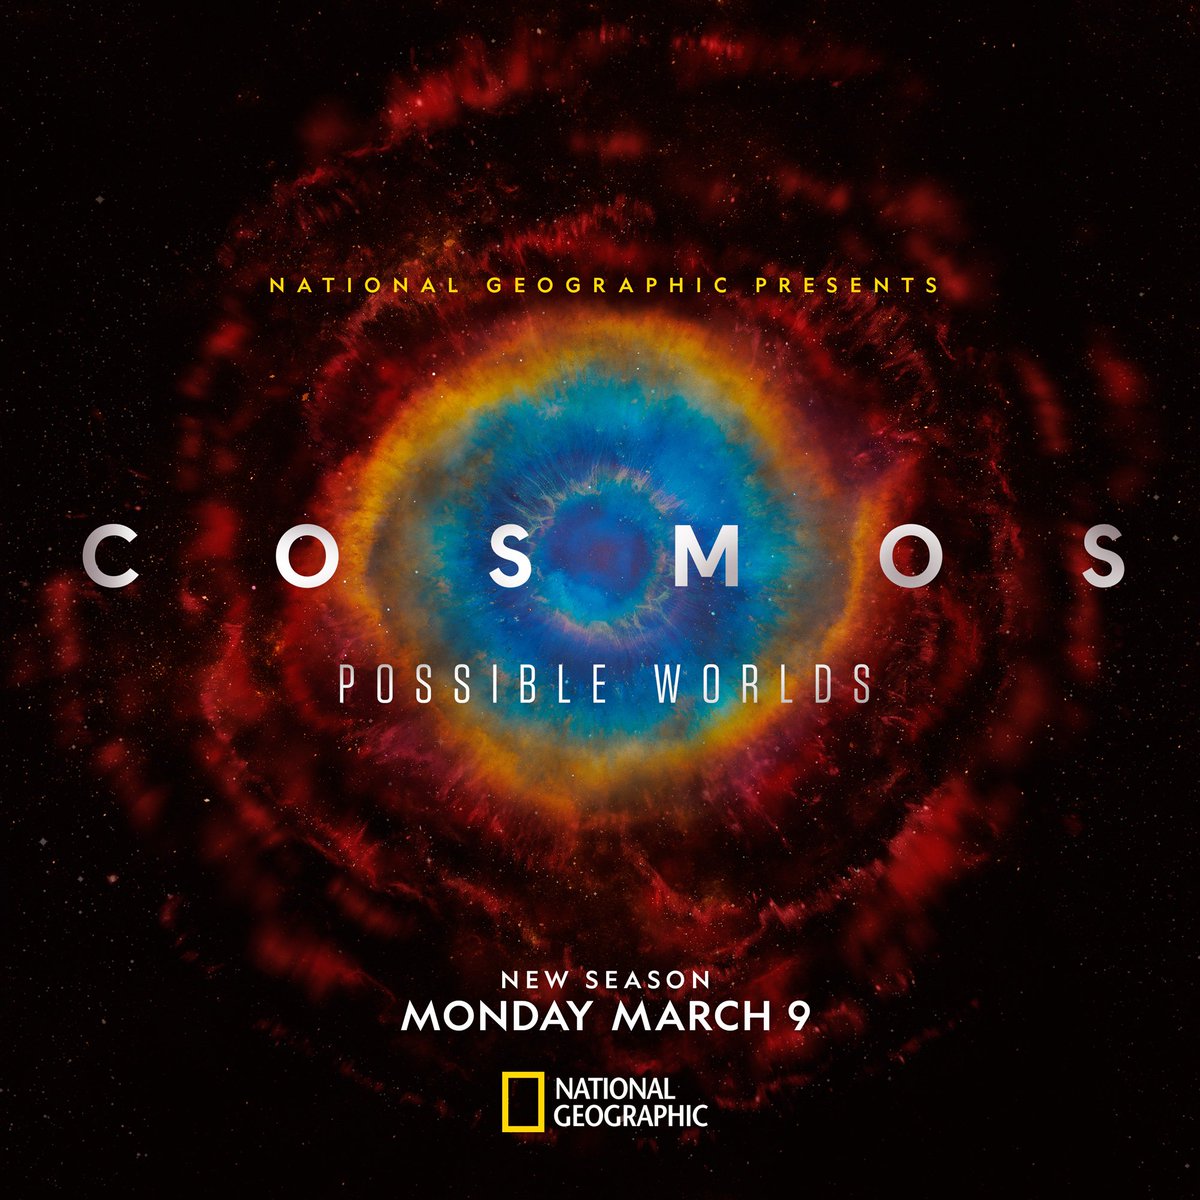 When Does 'Cosmos Possible Worlds' Season 2 Start on National